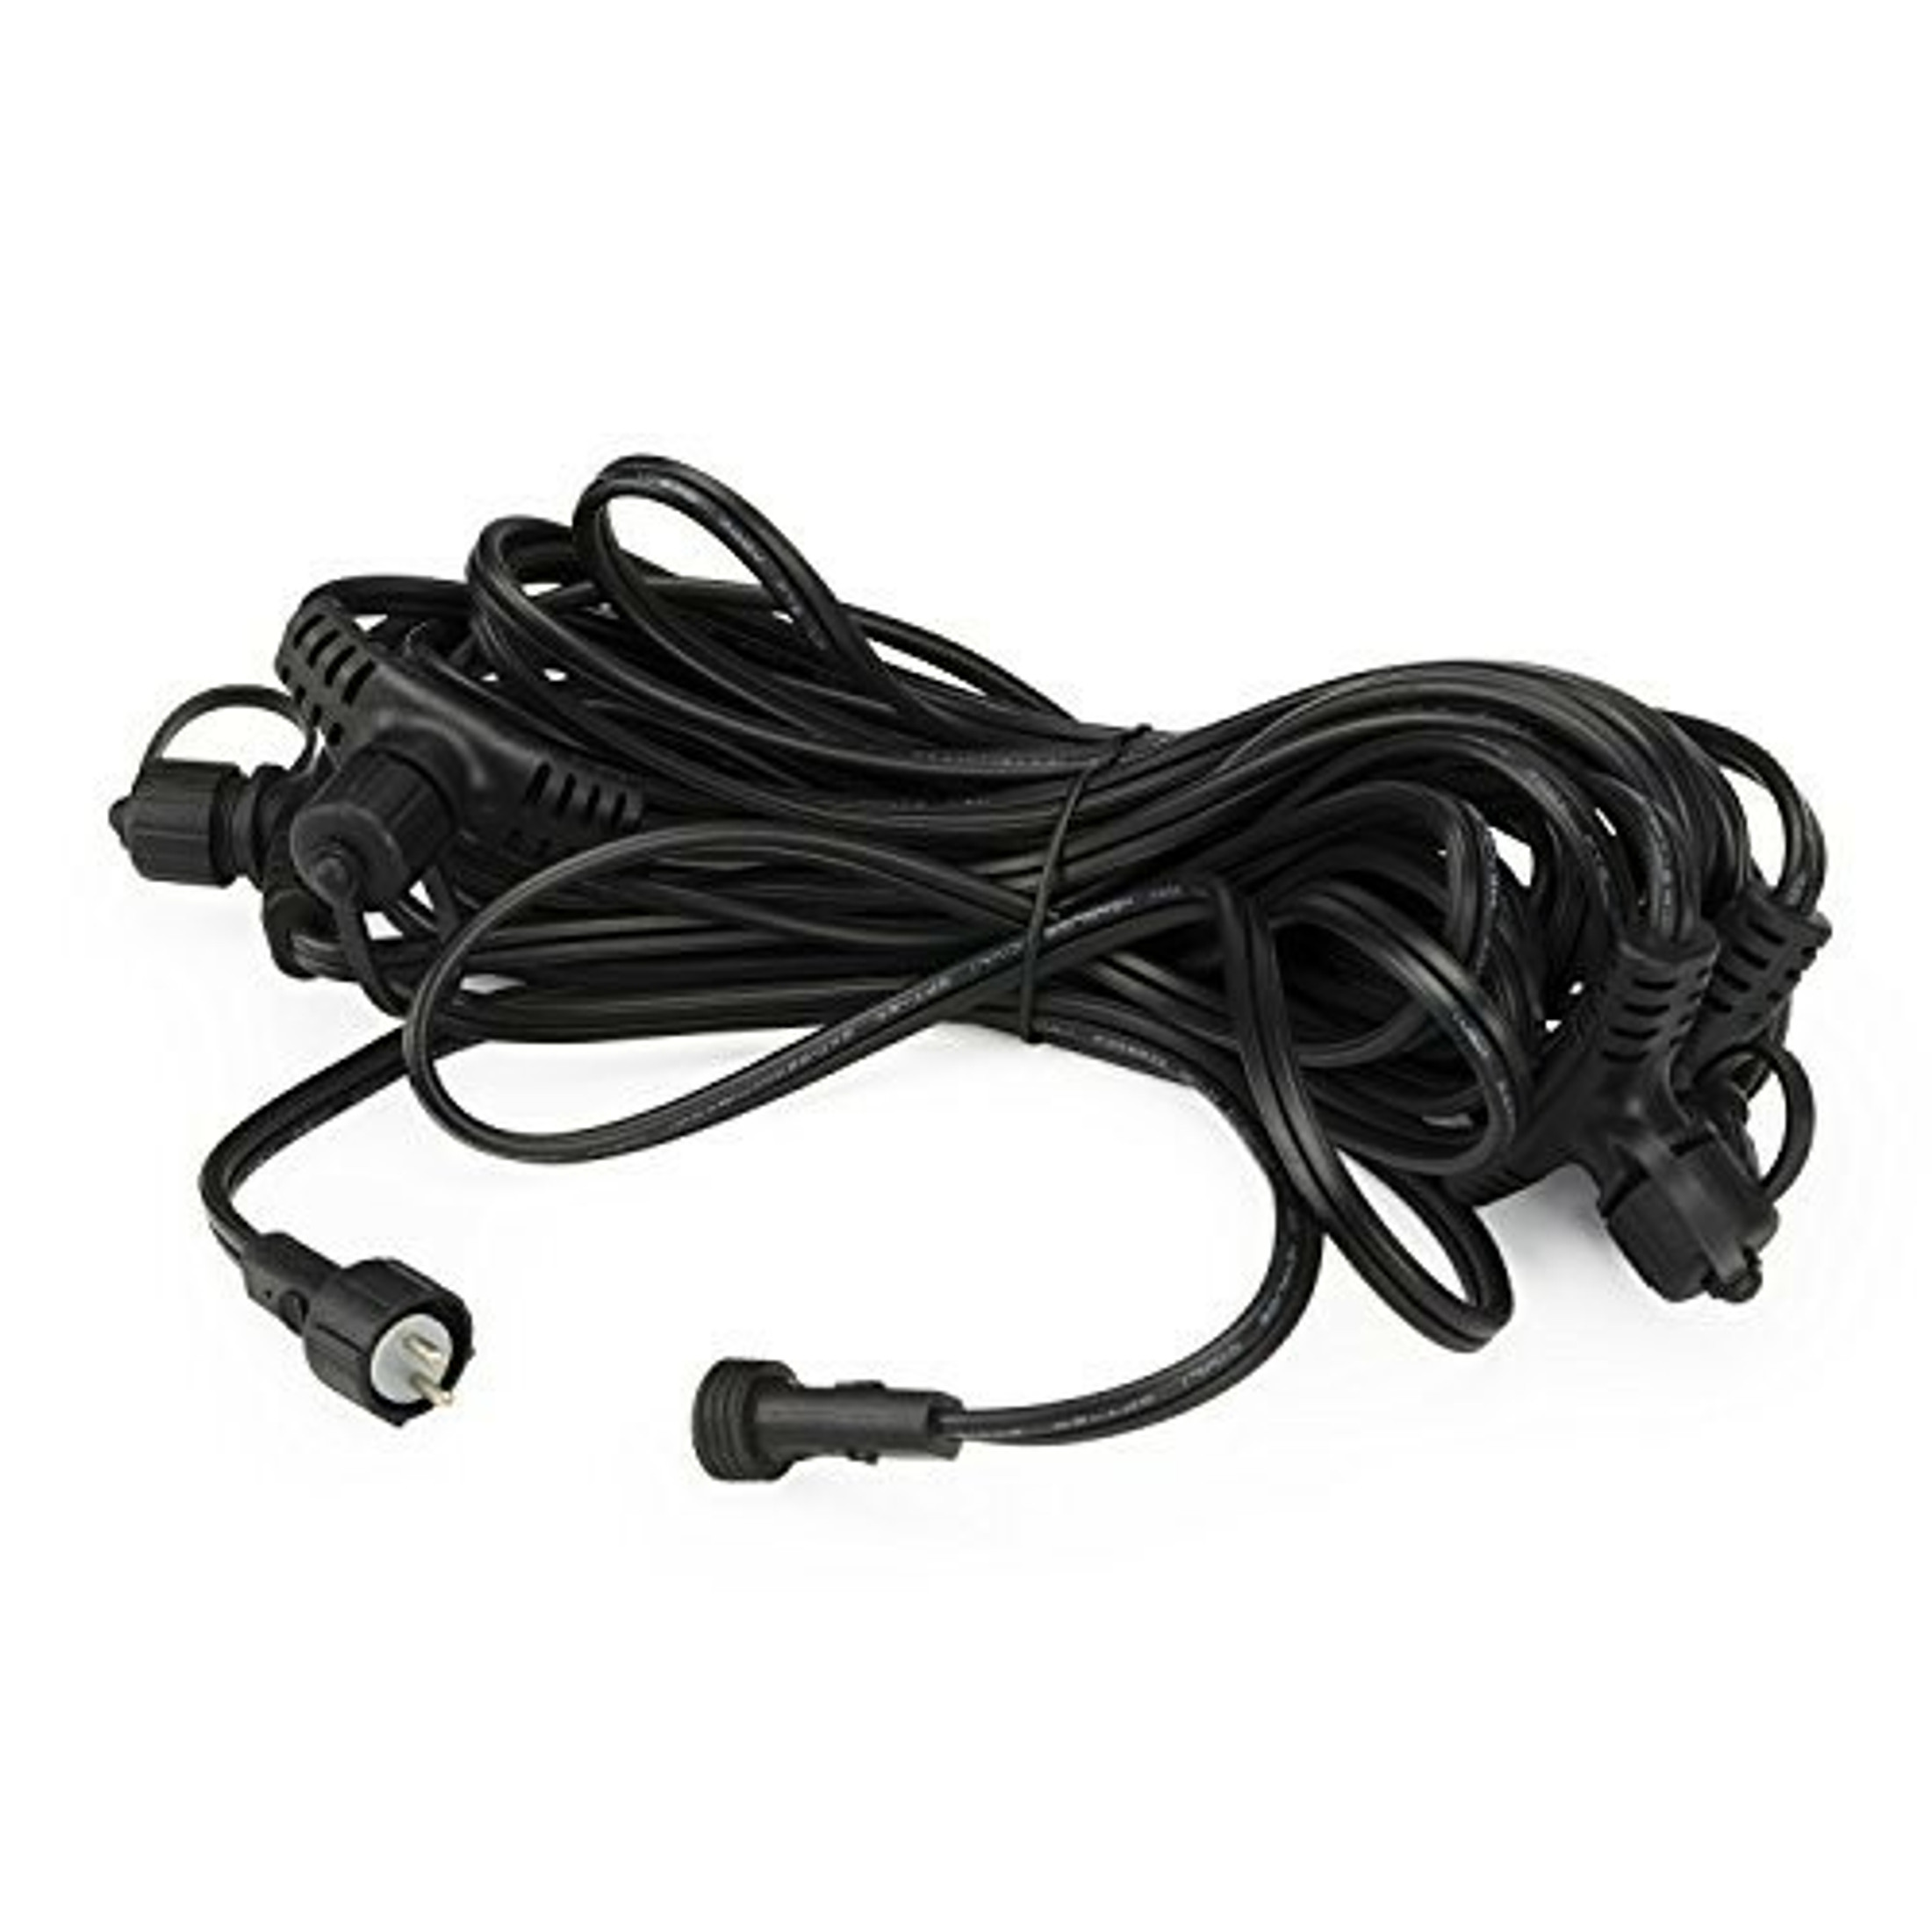 Aquascape Lighting Extension Cable with Quick-Connect, 25 Feet | 98998